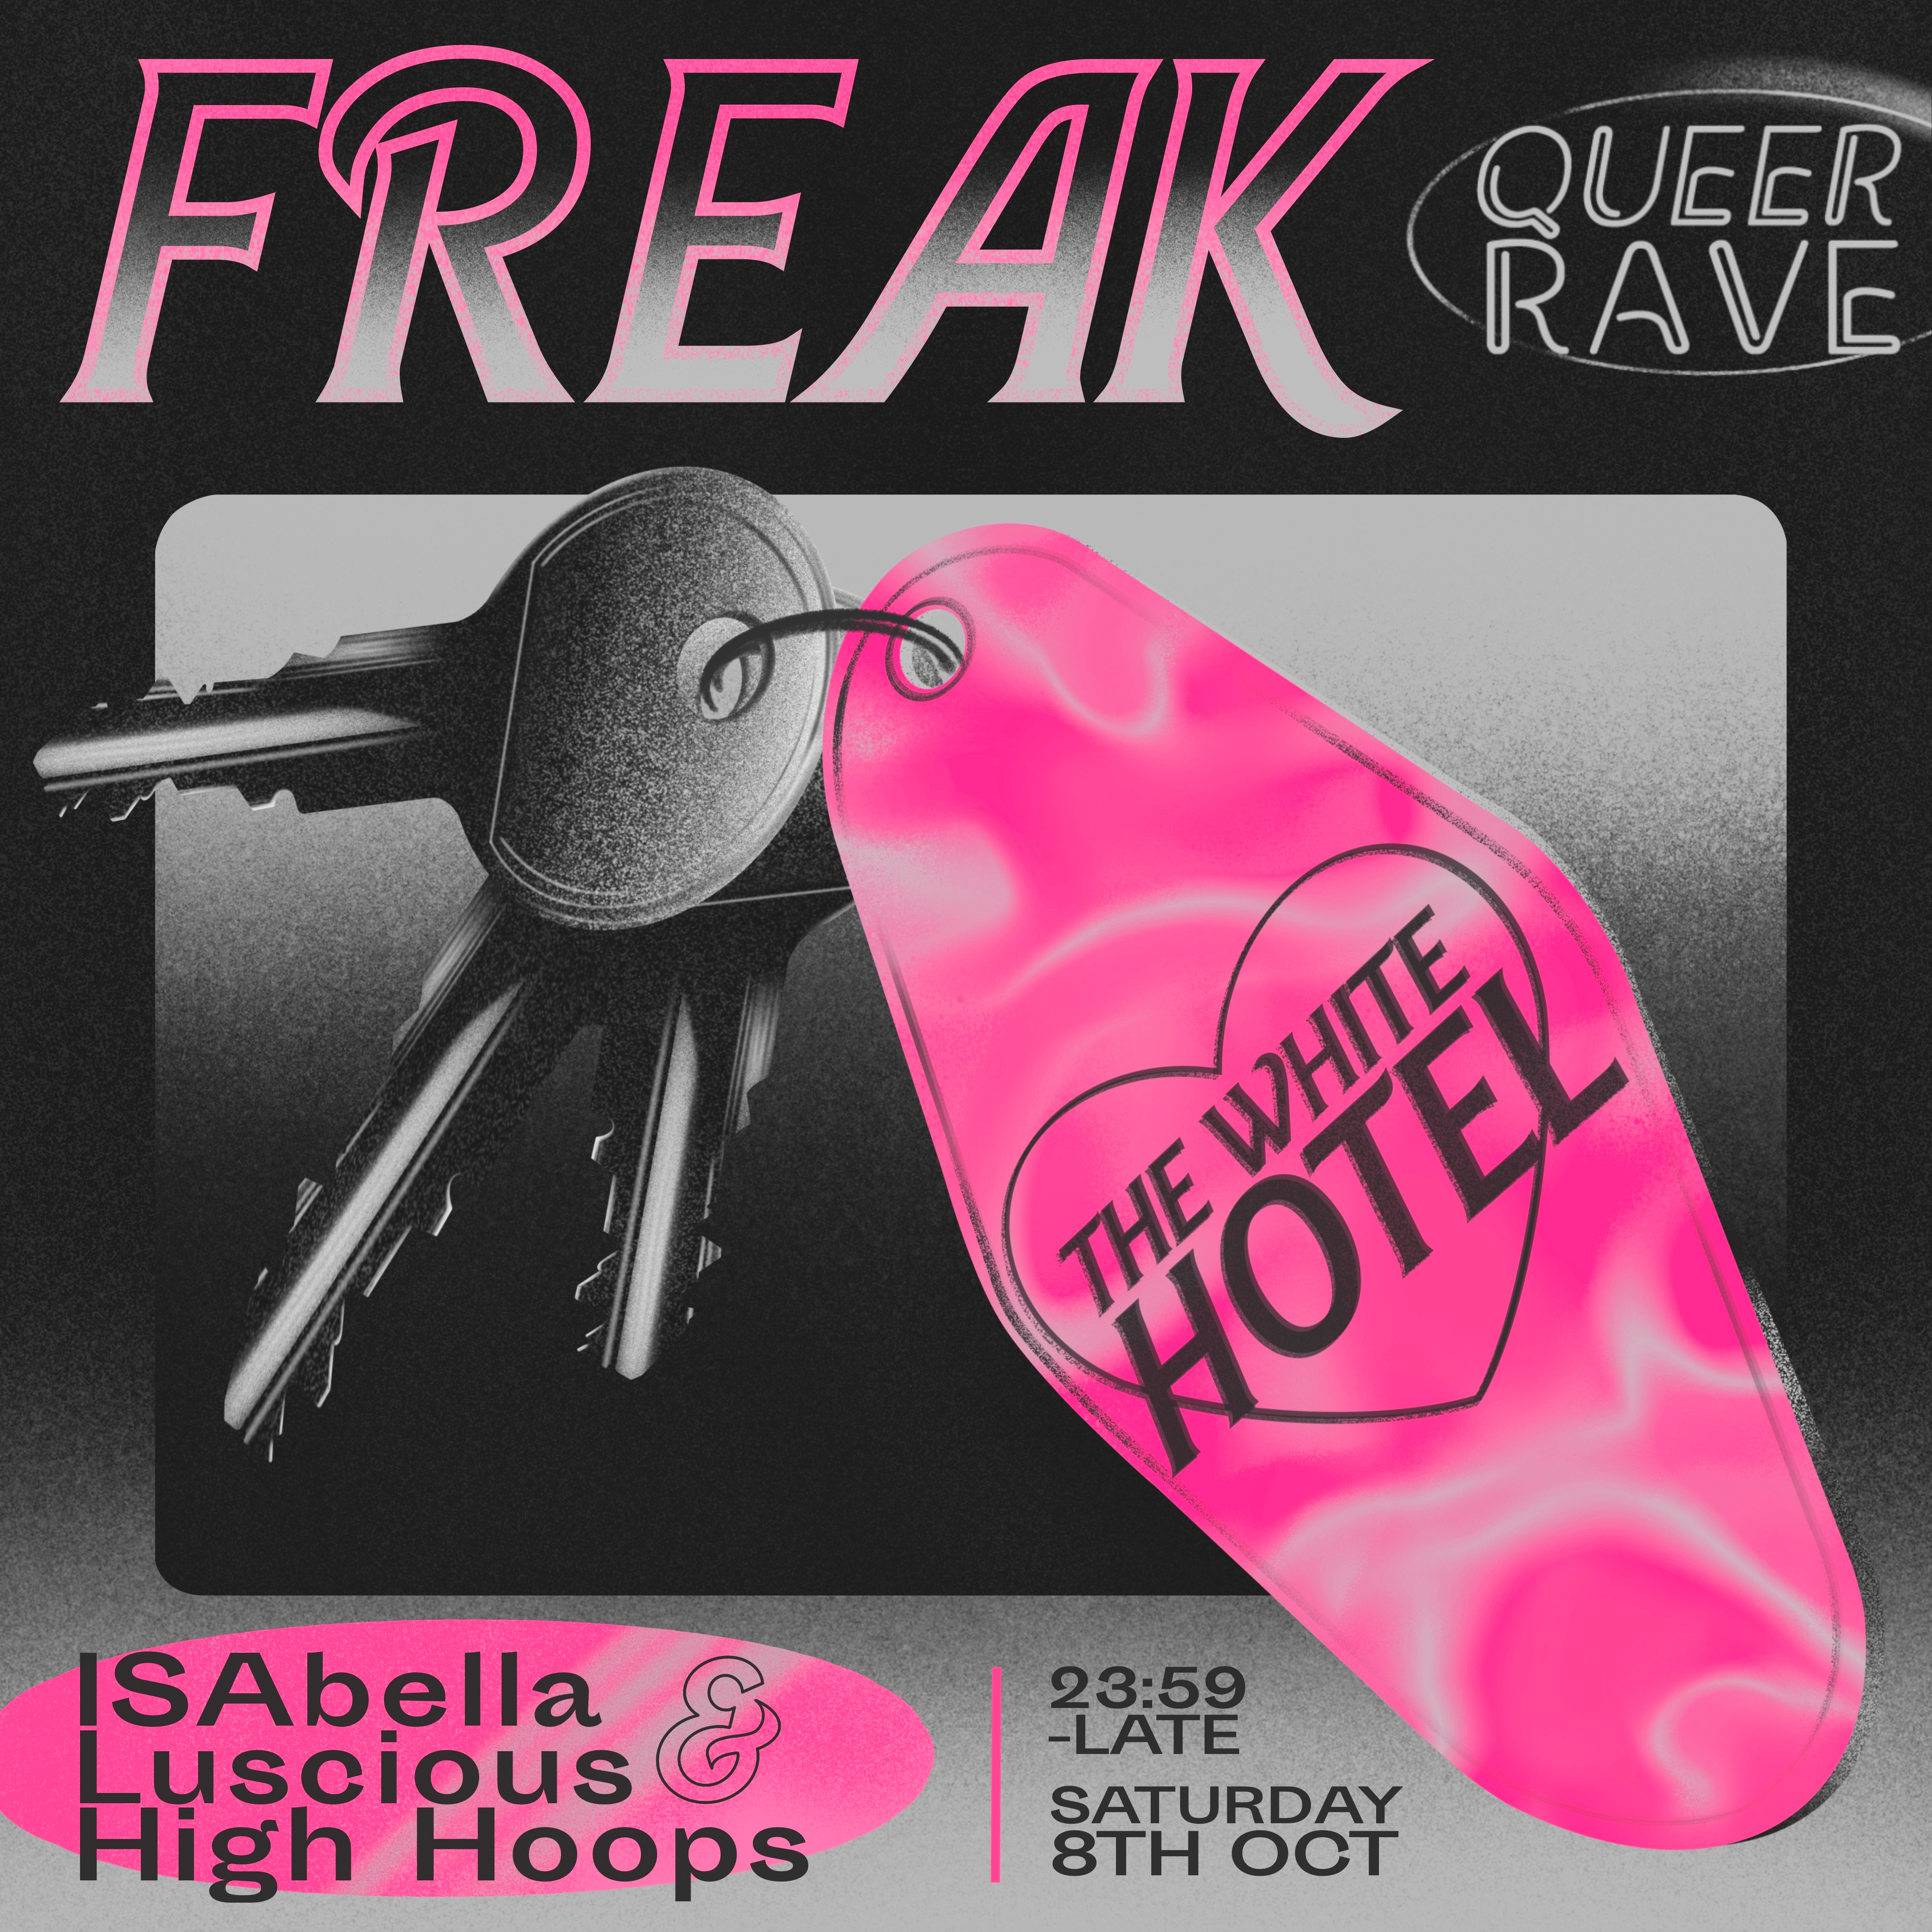 Freak Queer Rave w/ ISAbella, Luscious & High Hoops - Flyer front